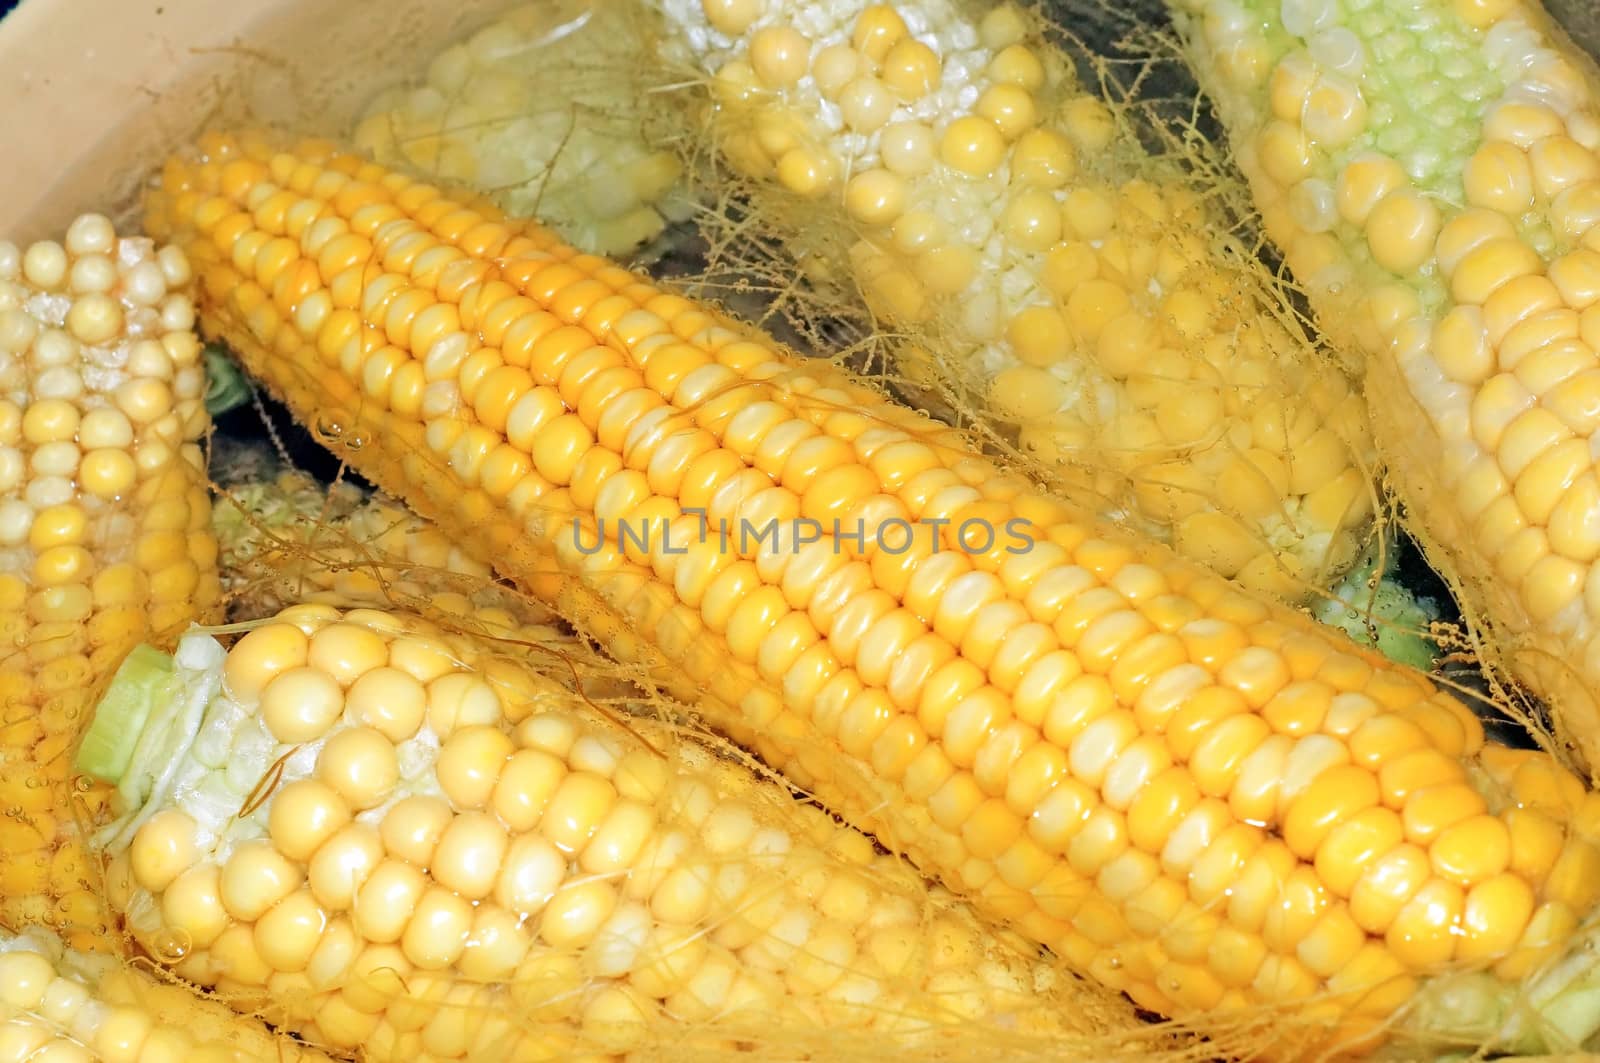 Cobs of corn cooking in water closeup      by Chiffanna